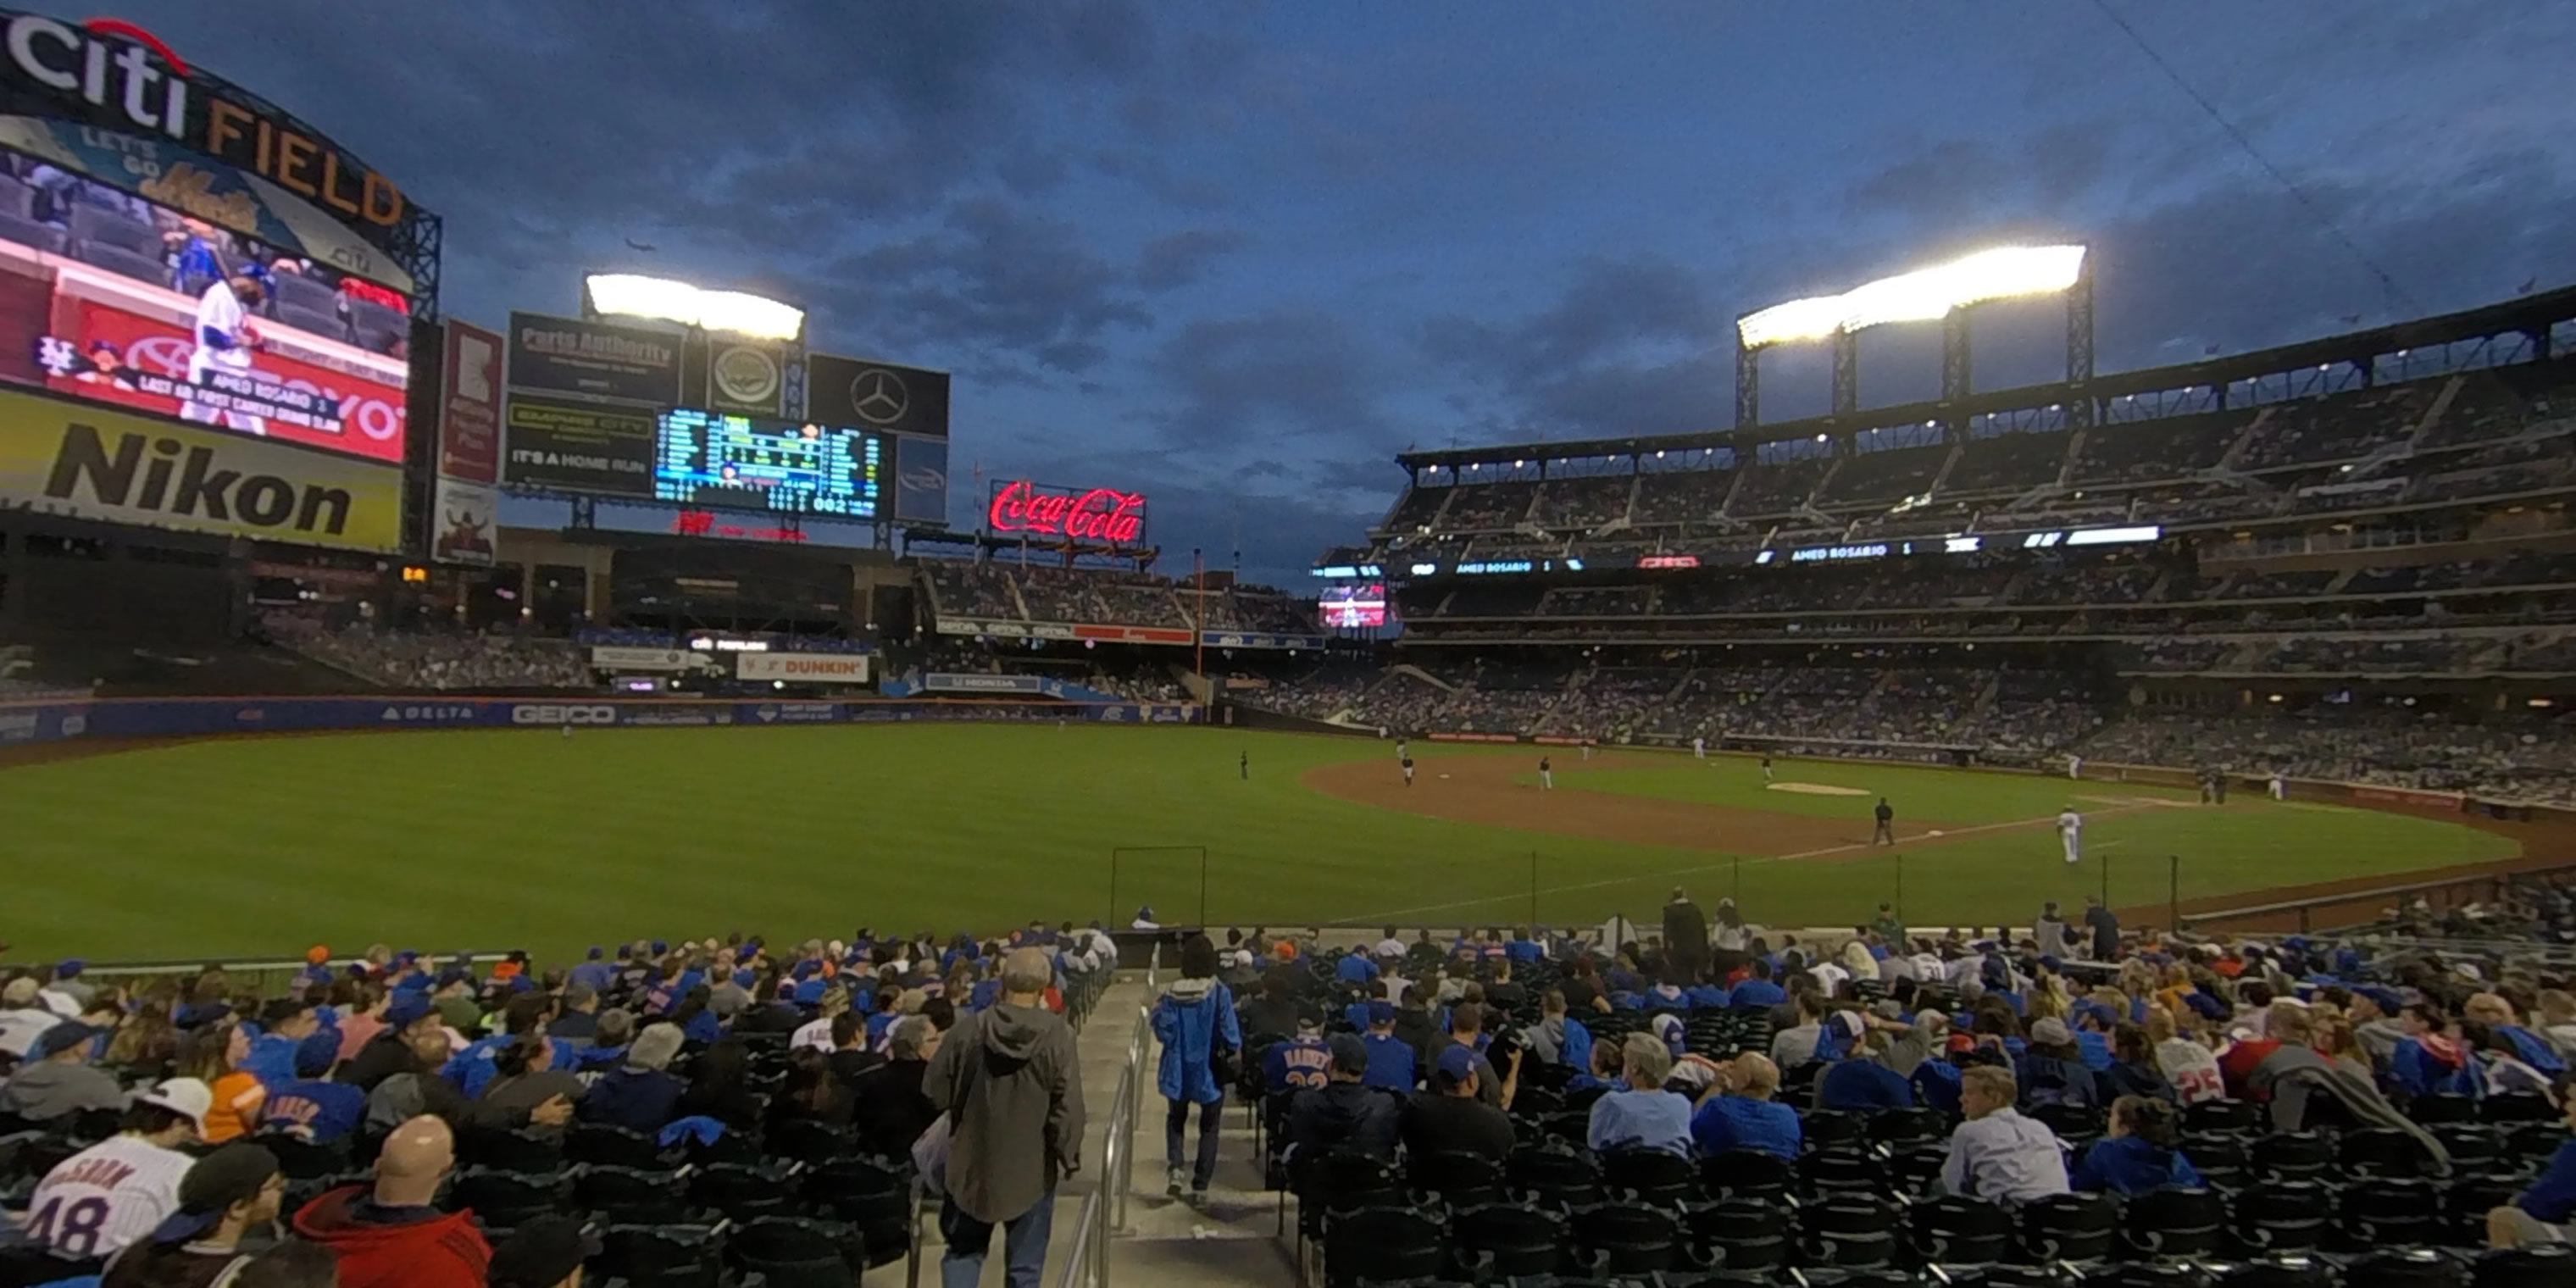 section 126 panoramic seat view  - citi field